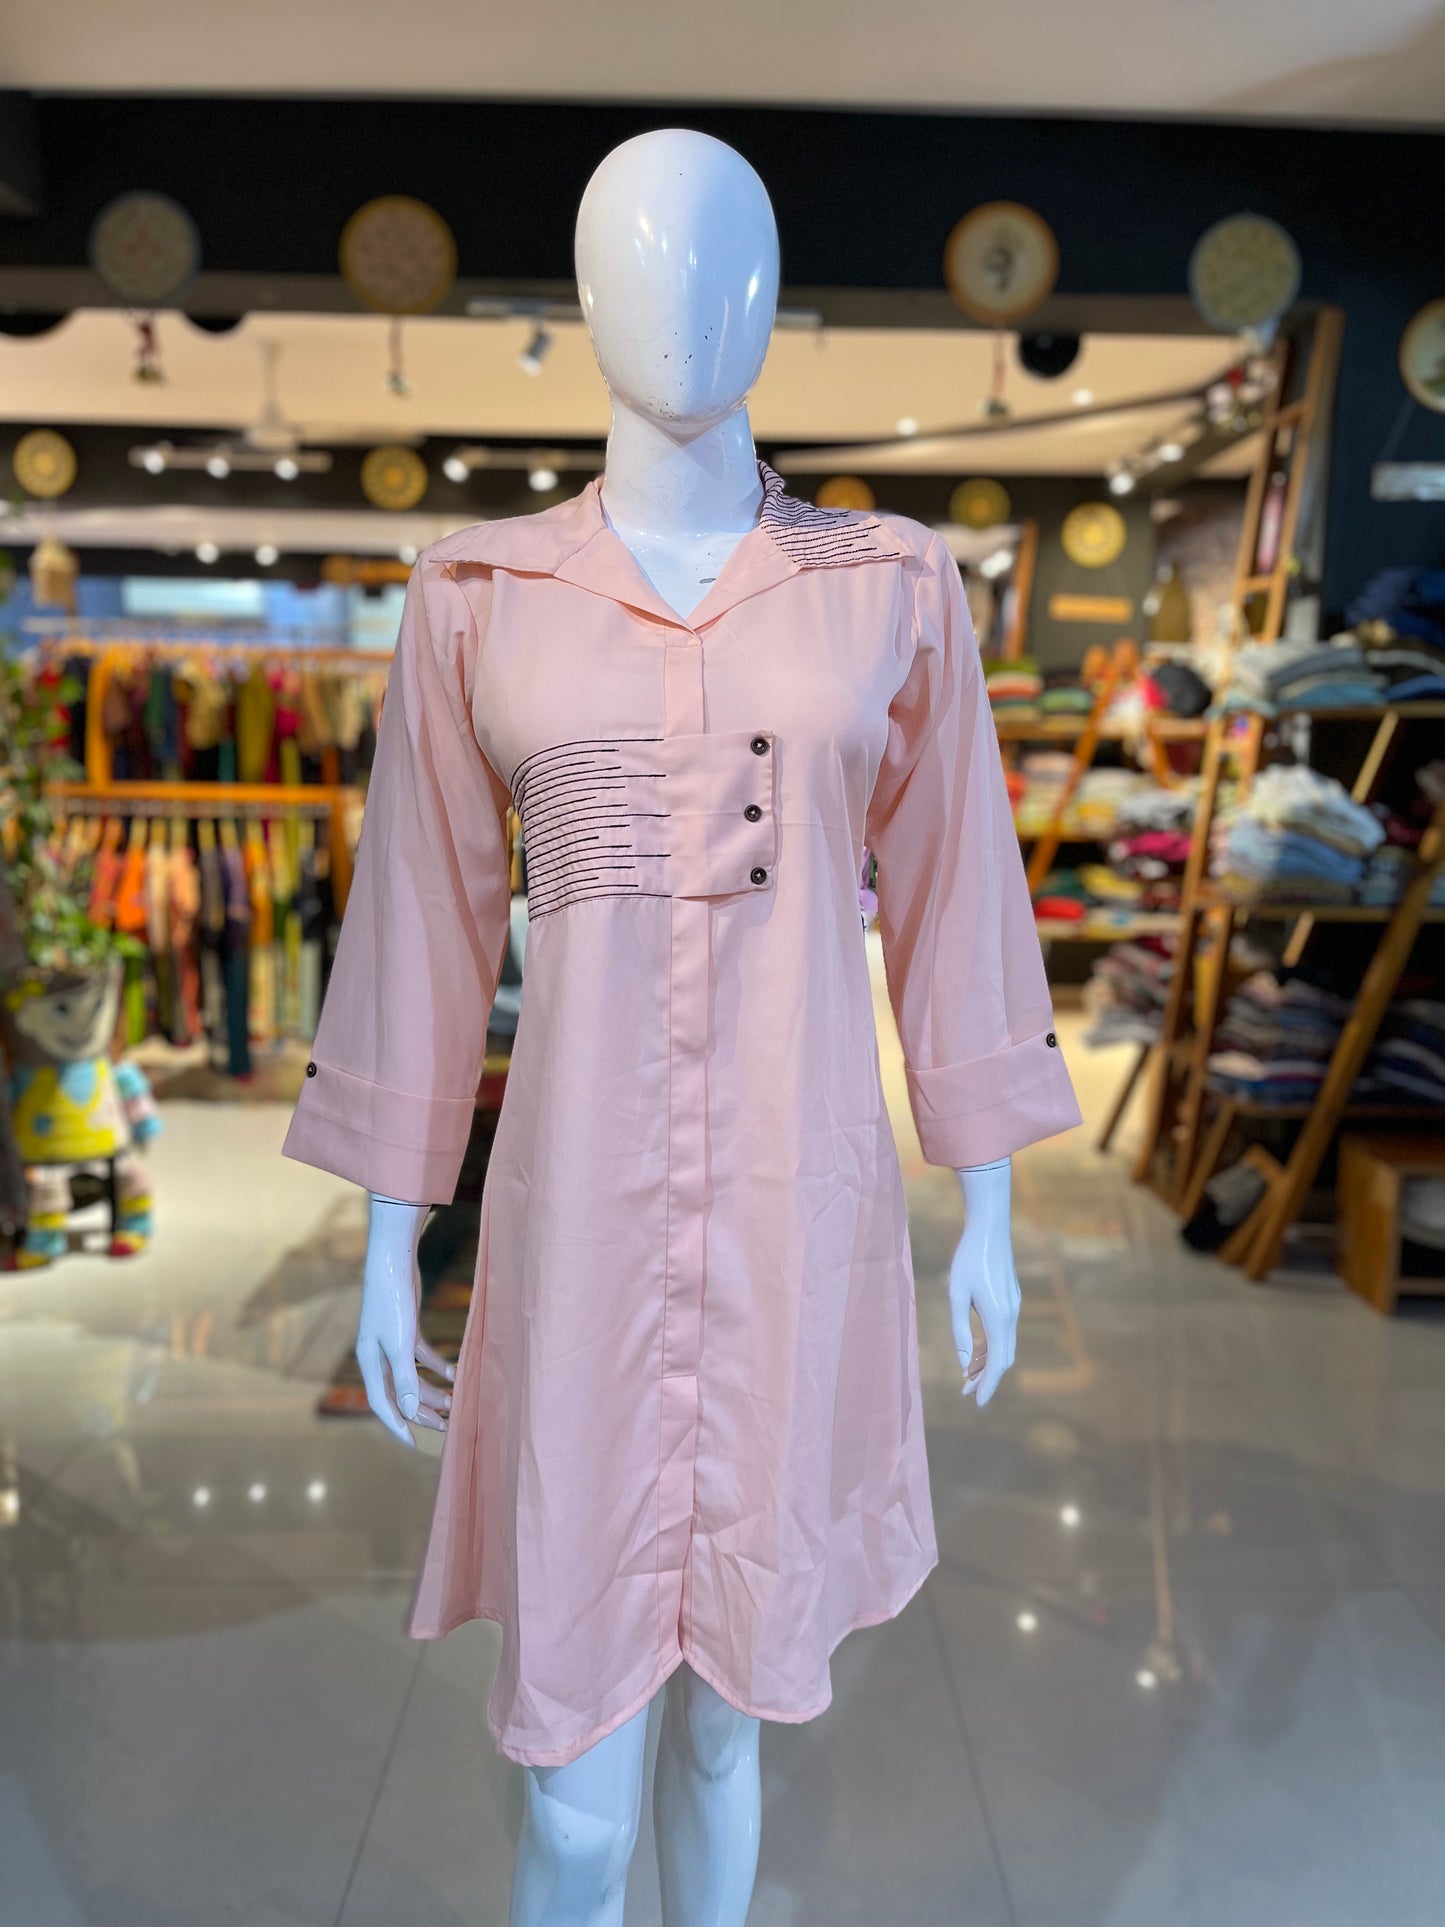 Peach collared crepe dress with embroidery